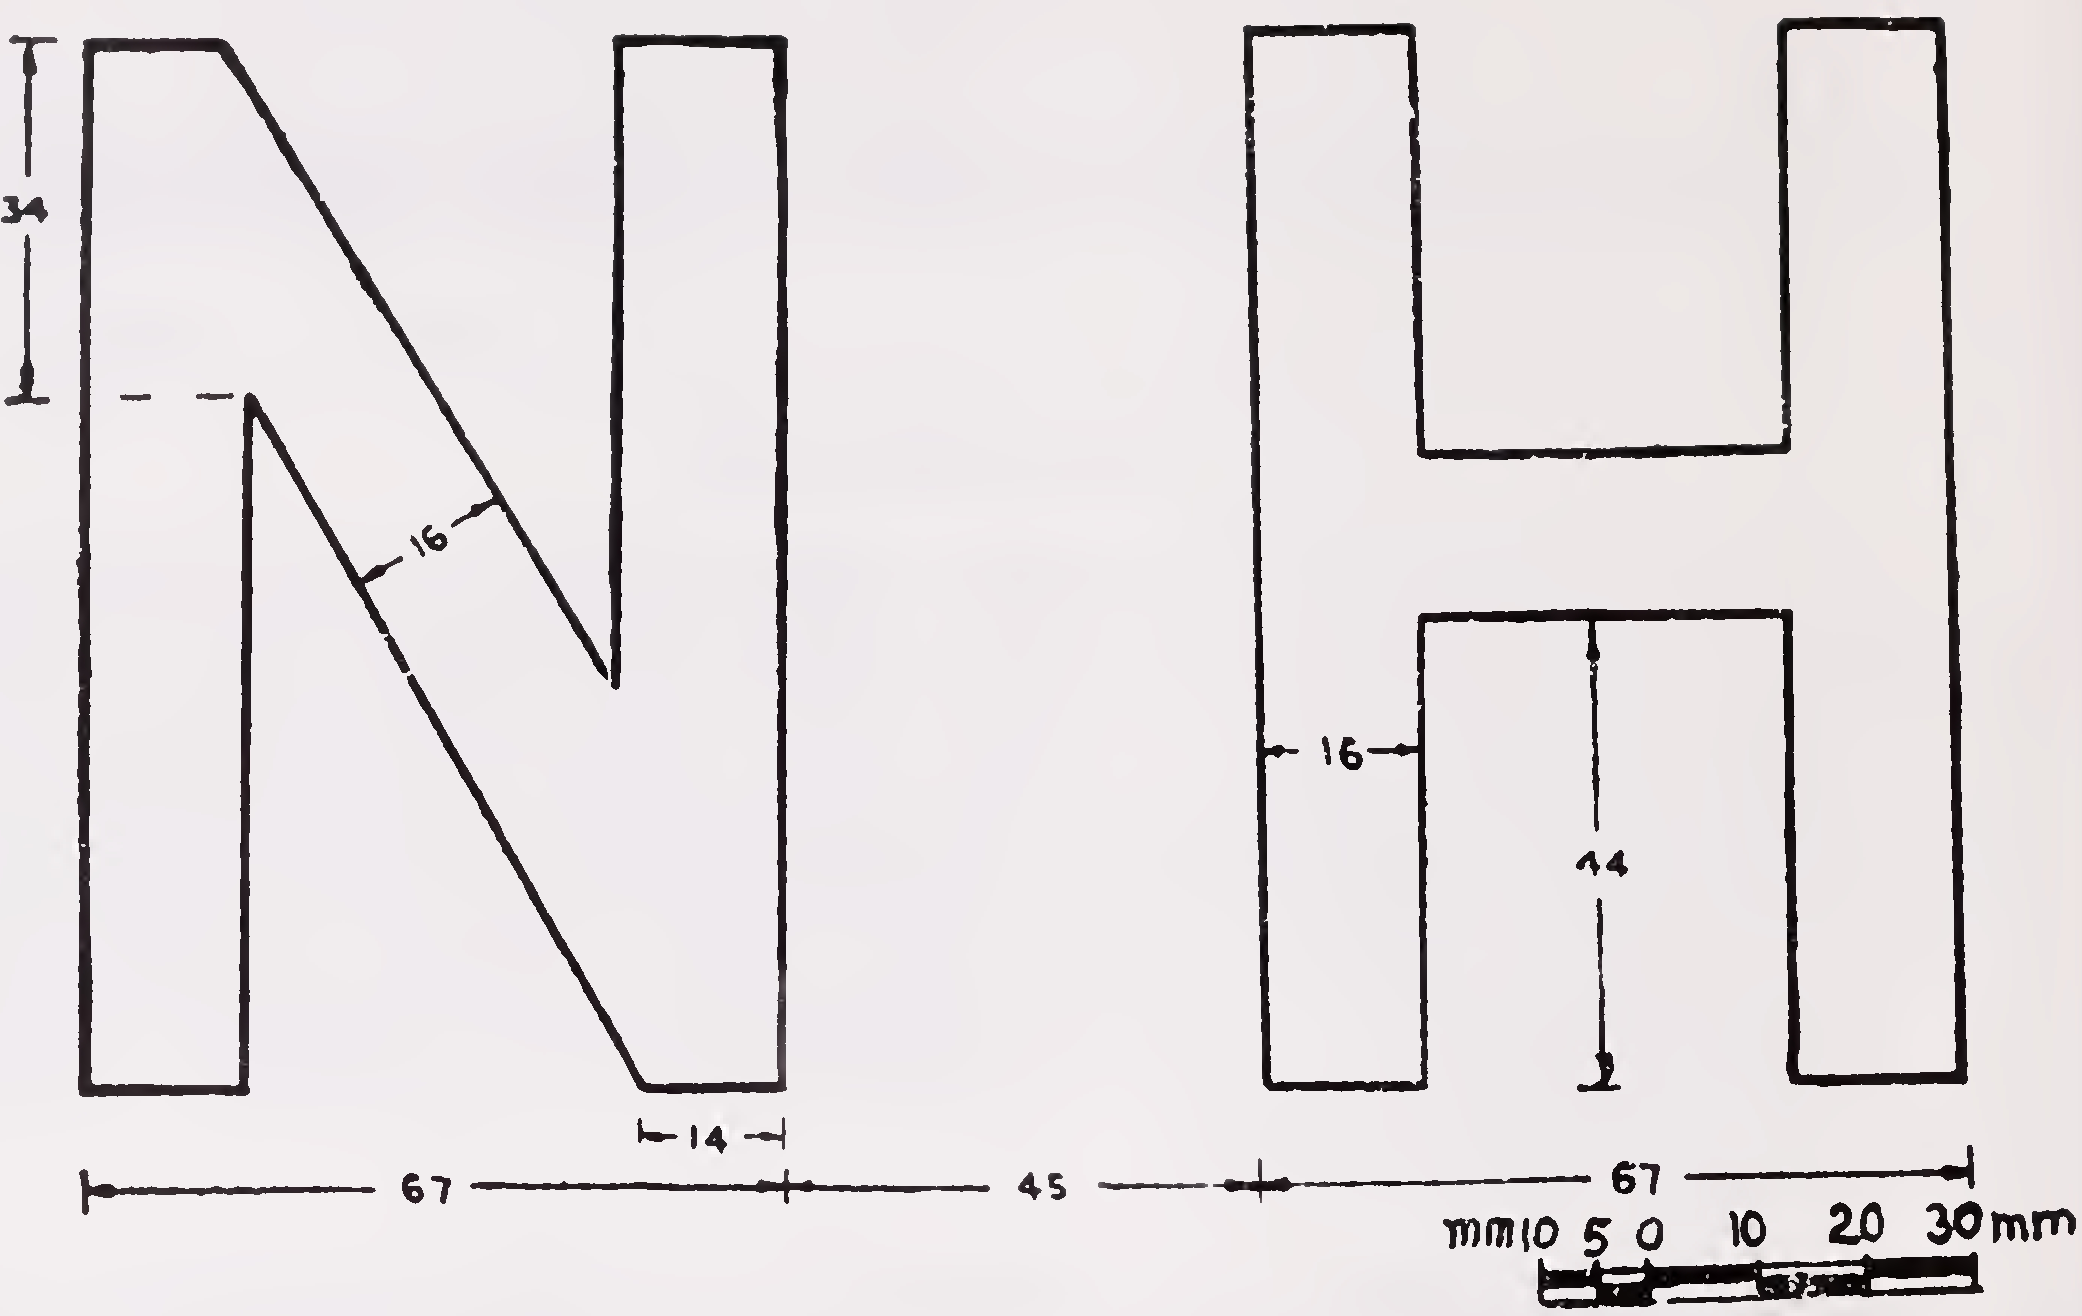 Fig-1: STANDARD LETTERS N AND H OF 100 mm HEIGHT